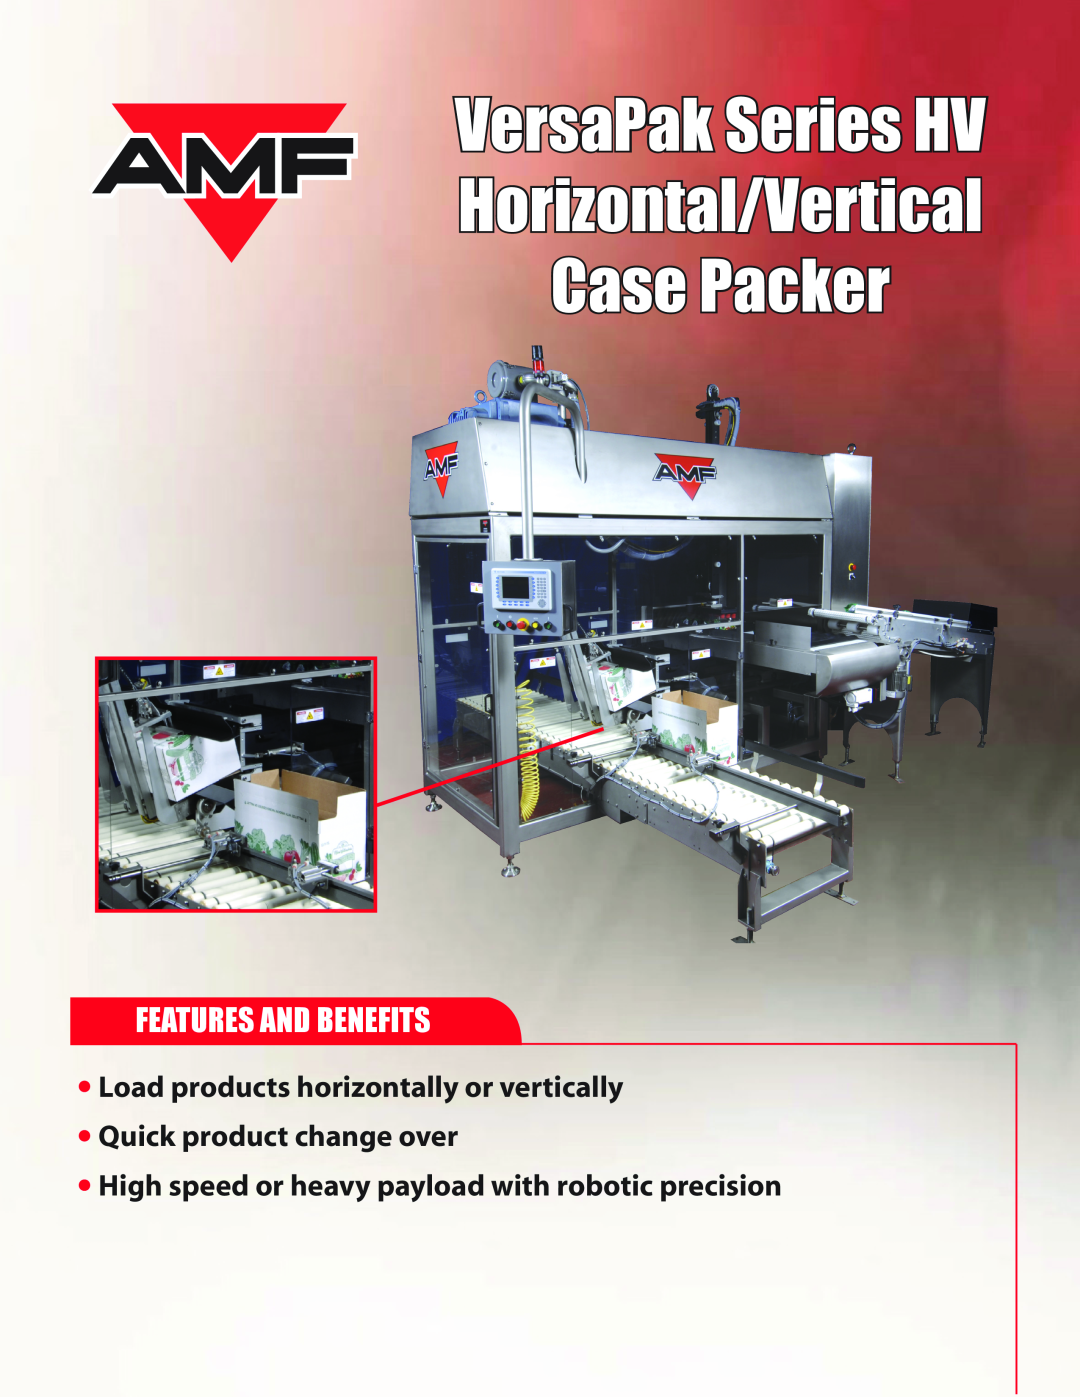 AMF manual Features And Benefits, VersaPak Series HV Horizontal/Vertical Case Packer 